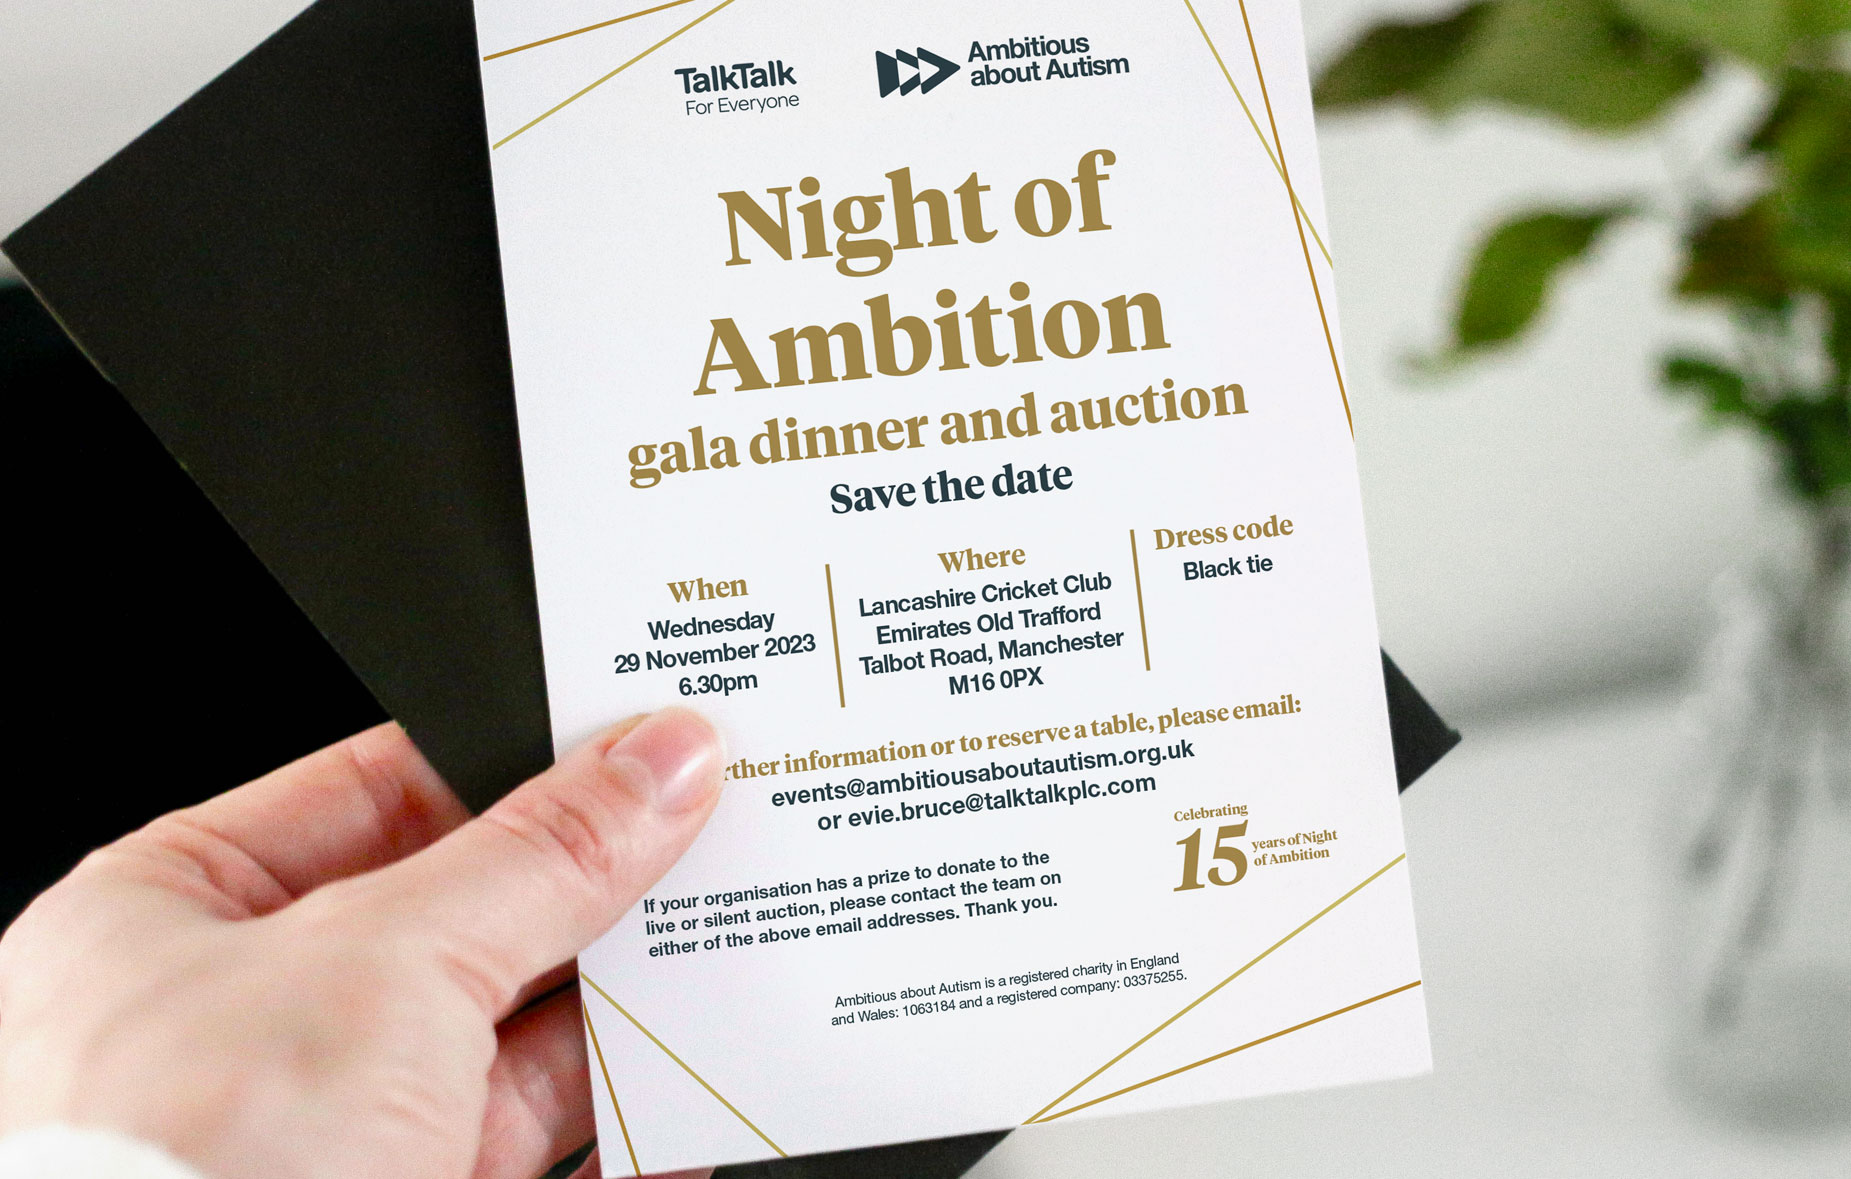 ambitious about autism - night of ambition 